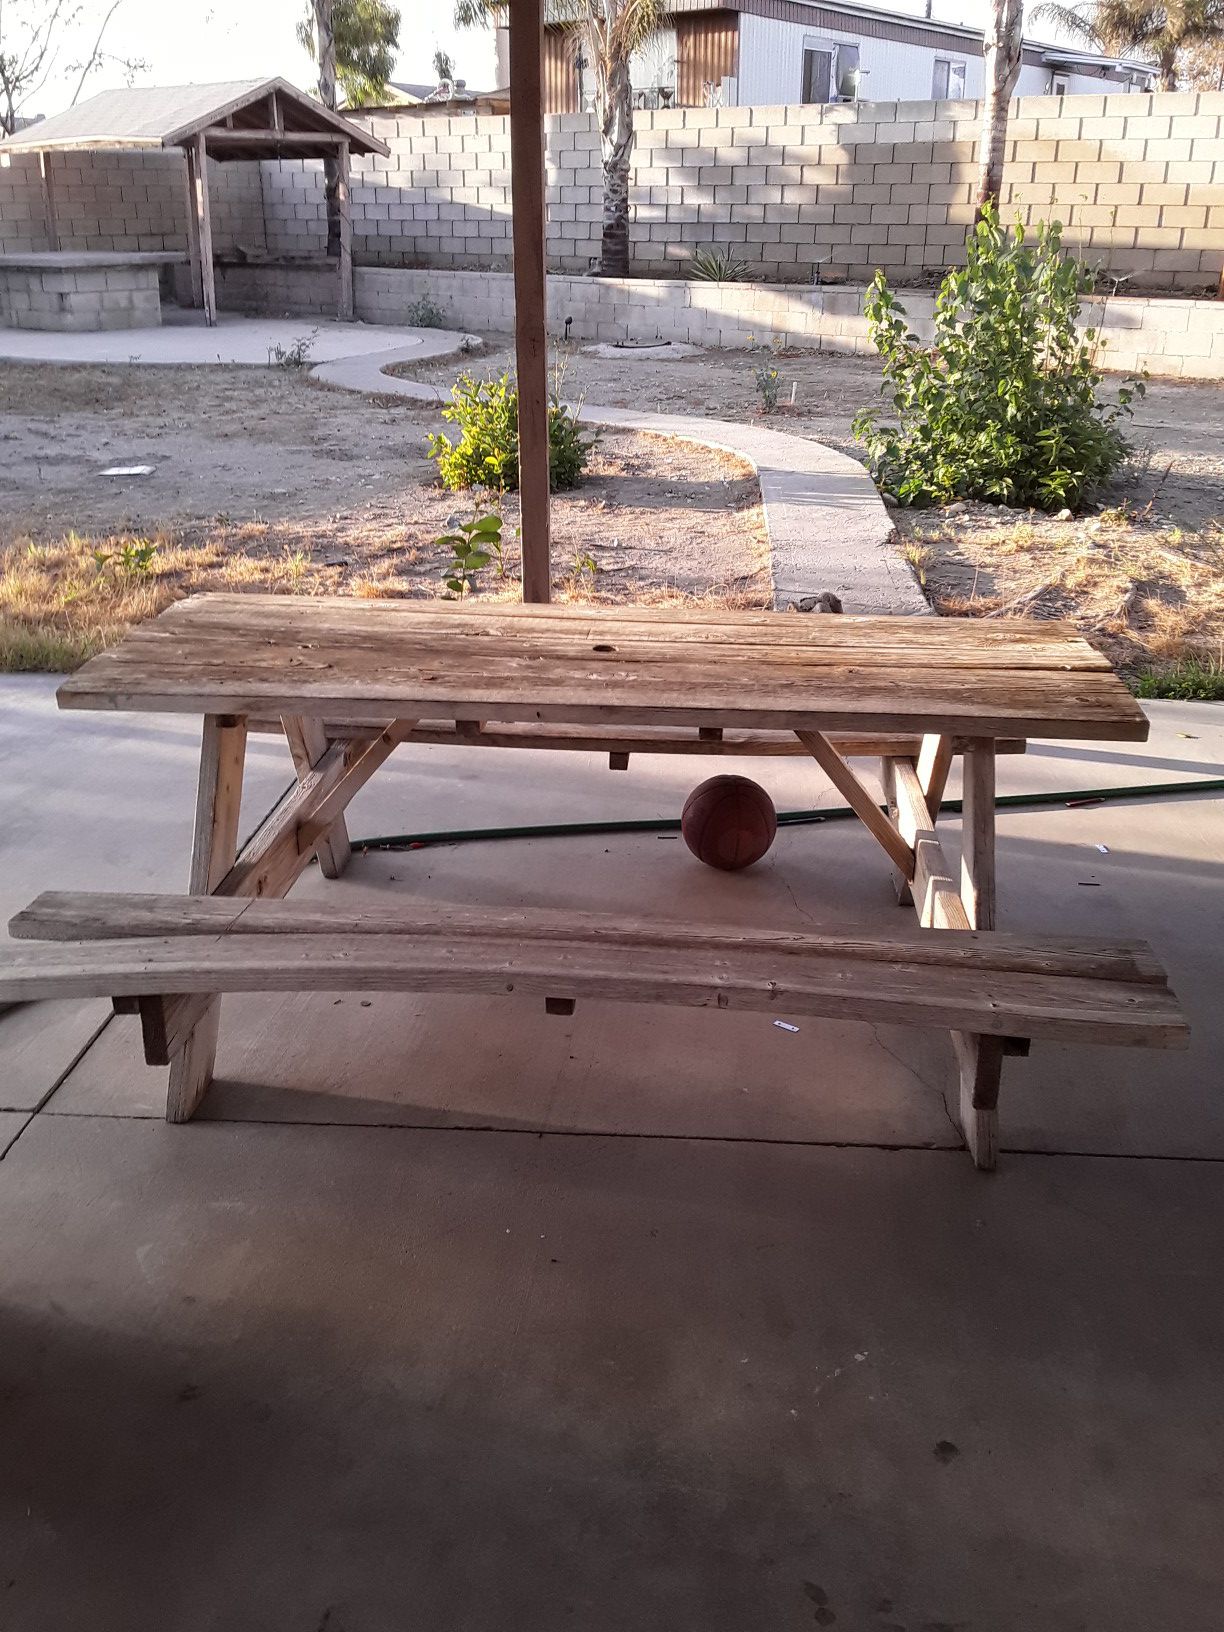 Picnic table 8328 maize court Fontana 92335 it will be on side of drive way when it's gone I'll post it